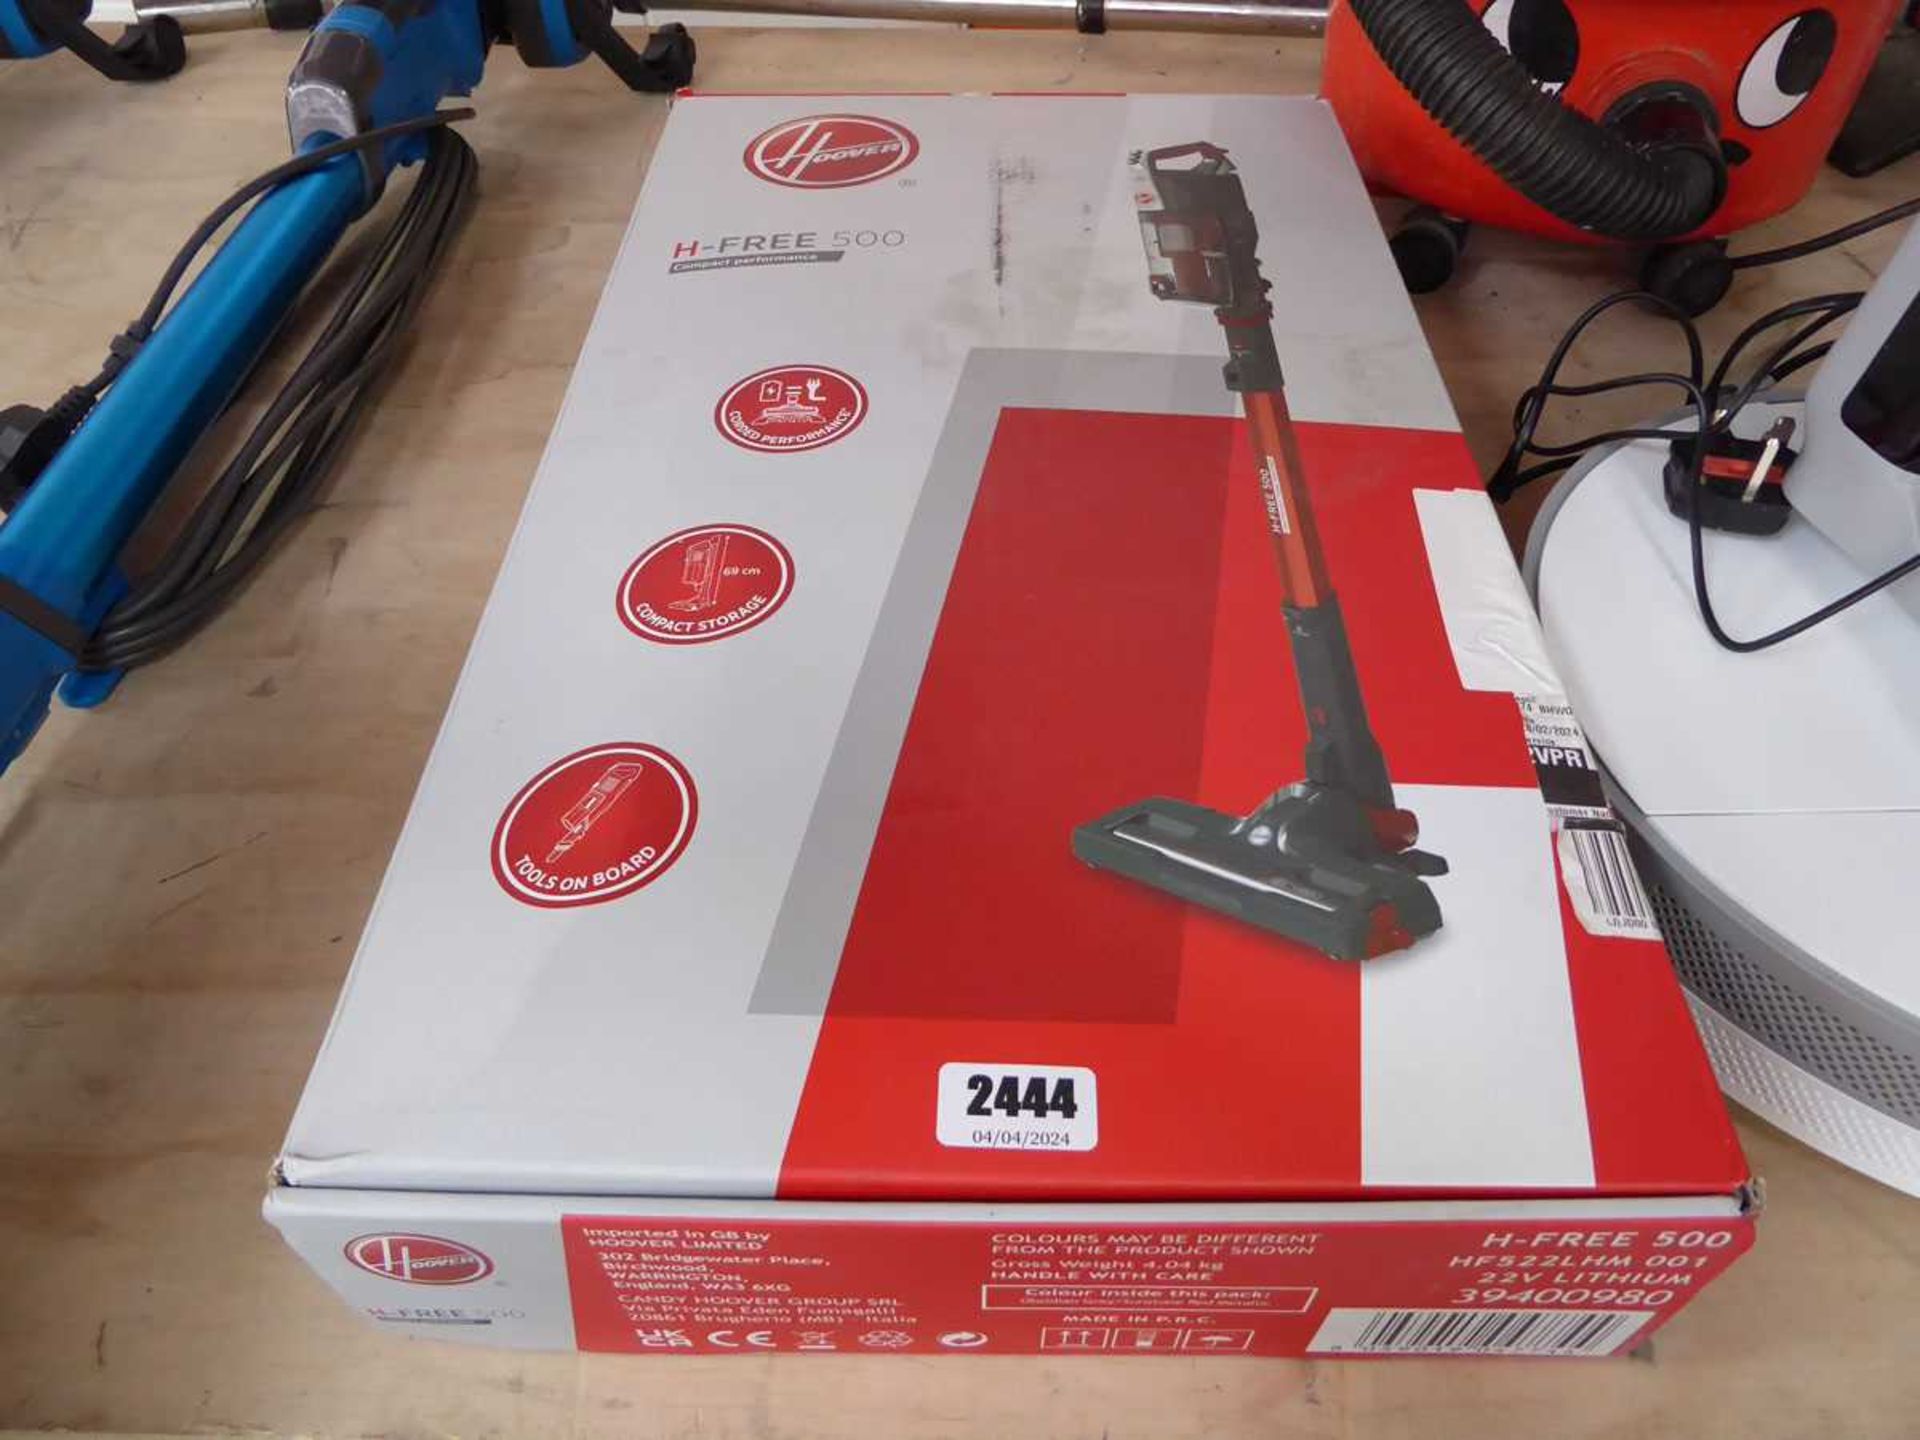 Hoover H3500 cordless vacuum cleaner